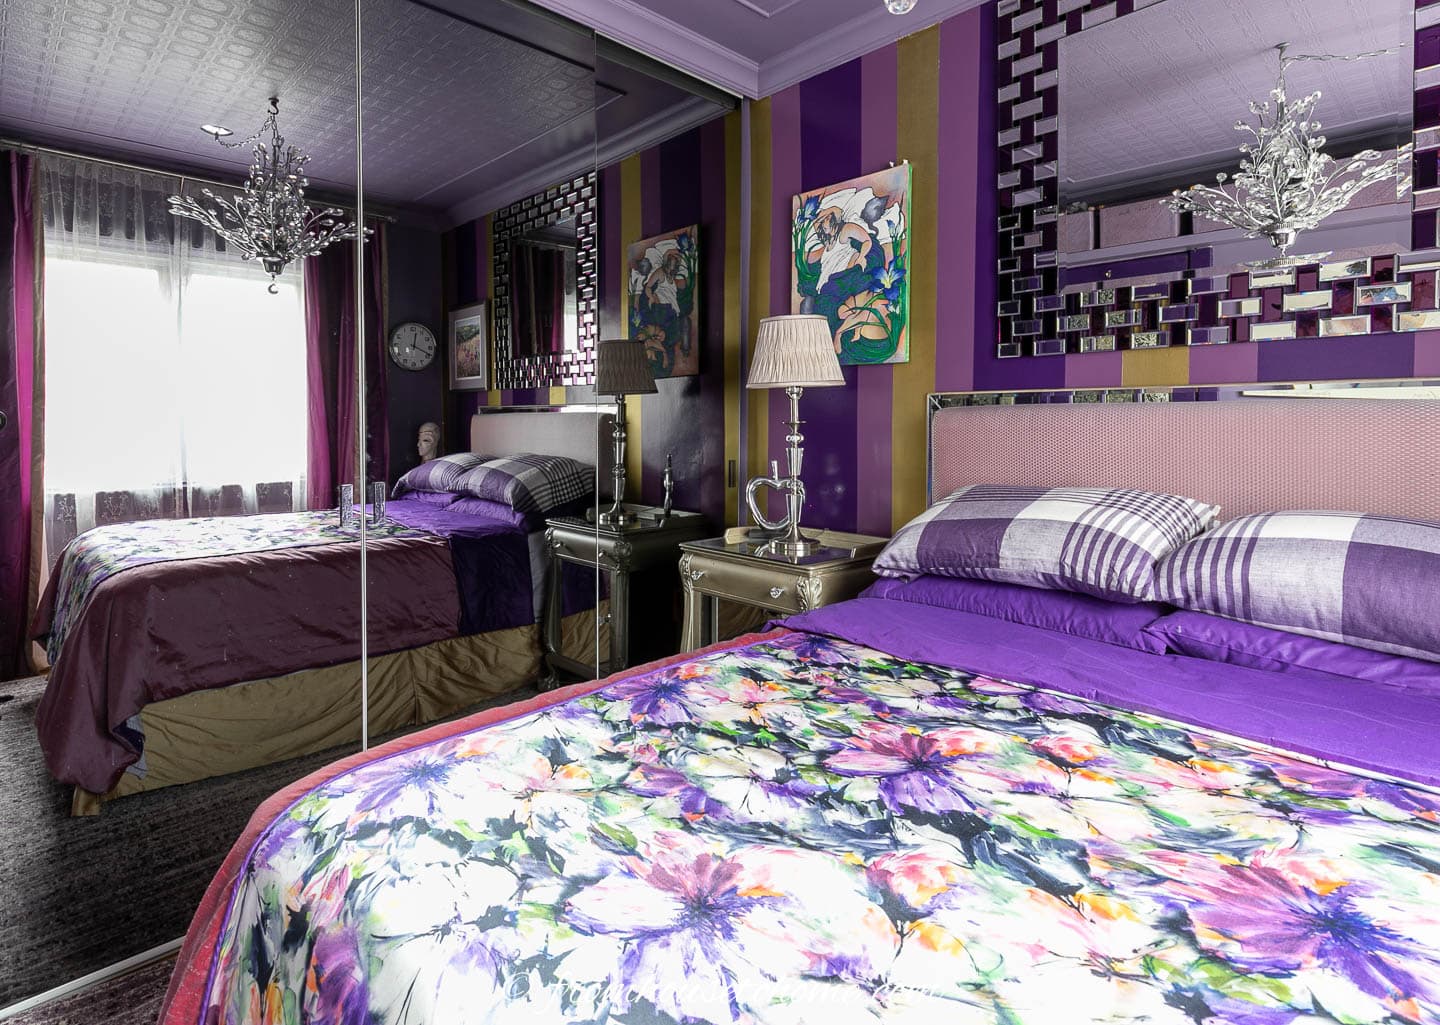 The purple and gold bedroom makeover with painted striped wall